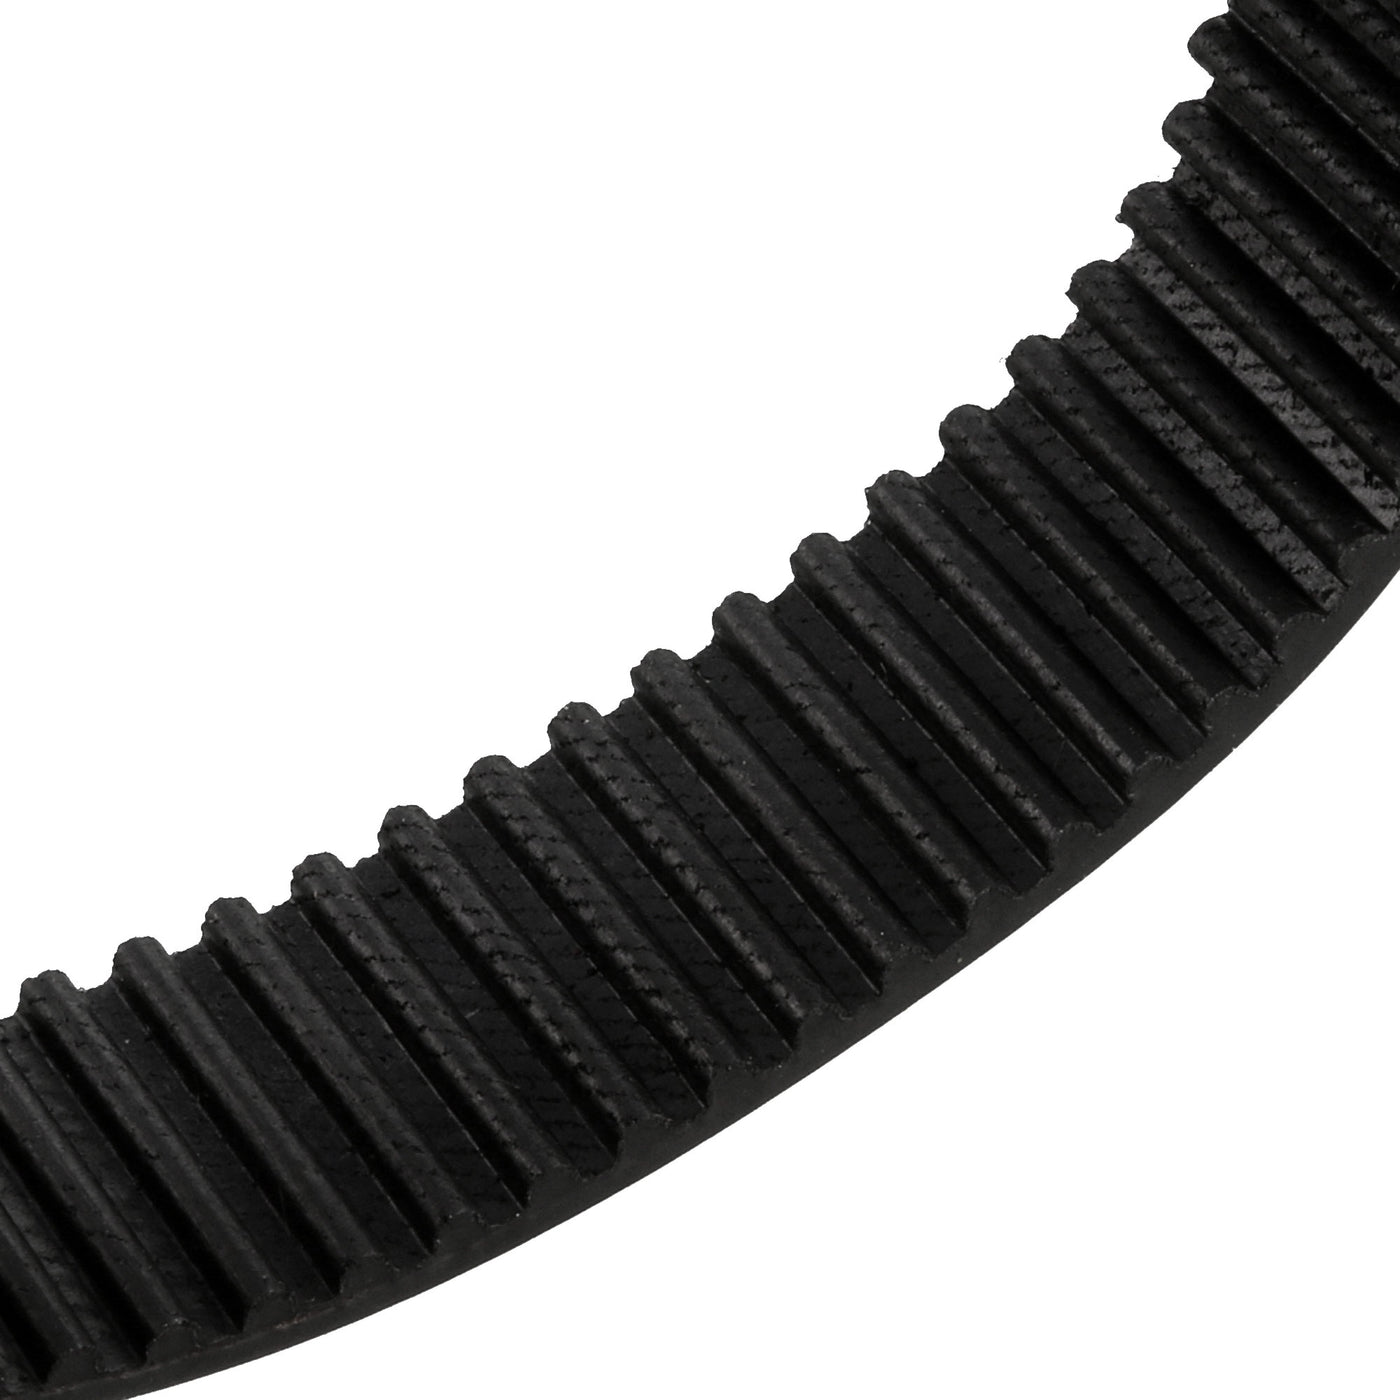 uxcell Uxcell HTD3M201 Rubber Timing Belt Synchronous Closed Loop Timing Belt Pulley 15mm Width